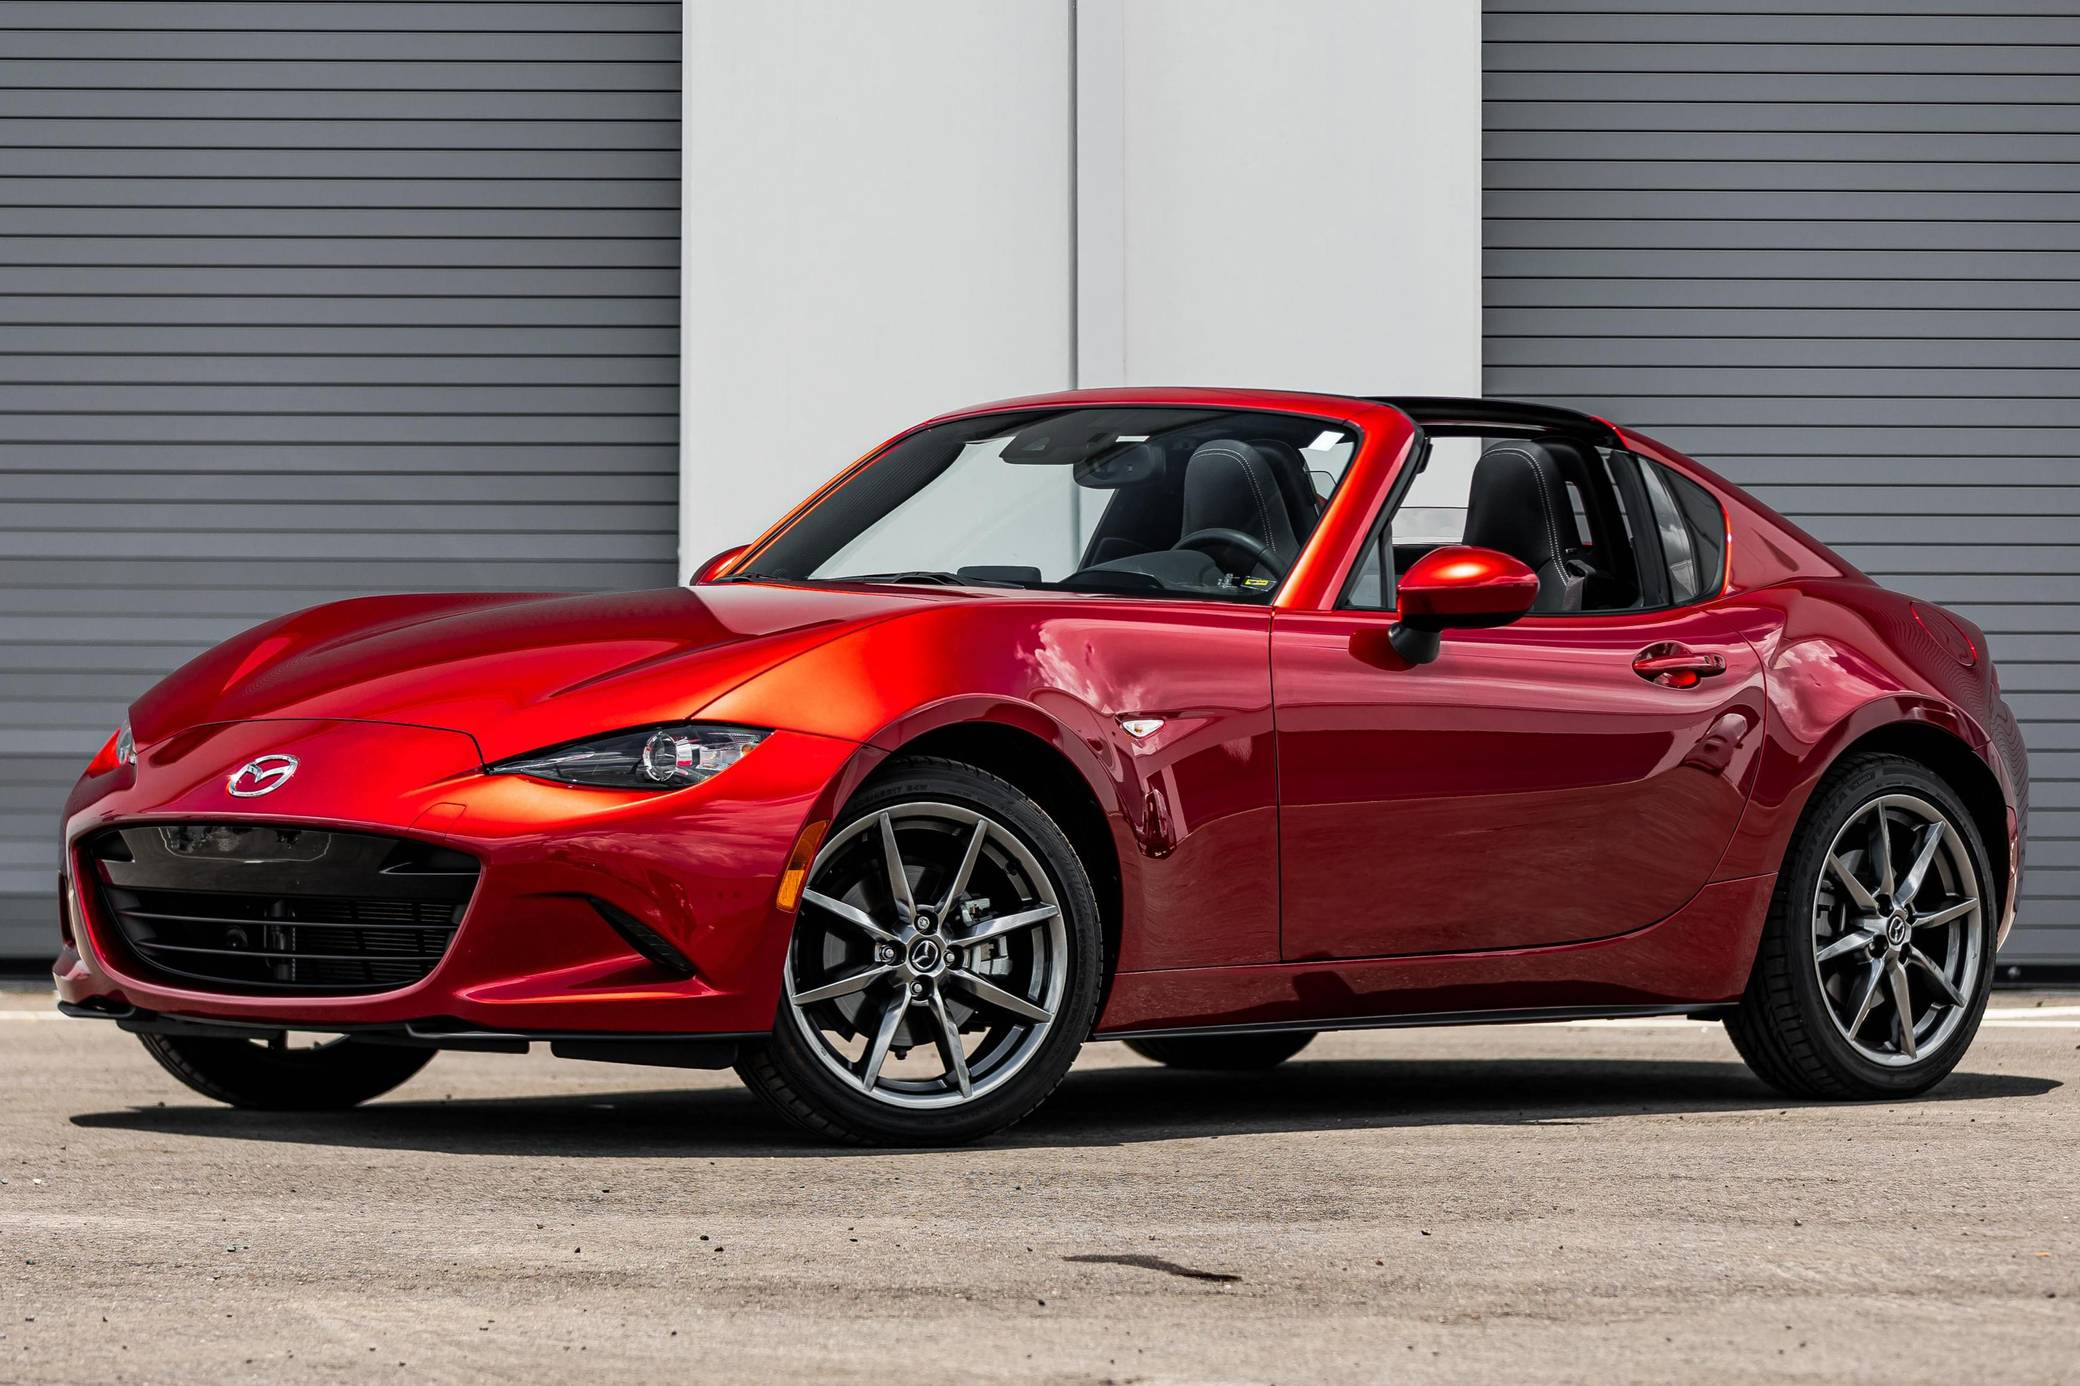 Antenne courte The Stubby Mazda MX-5 NC Roadster & Coupe